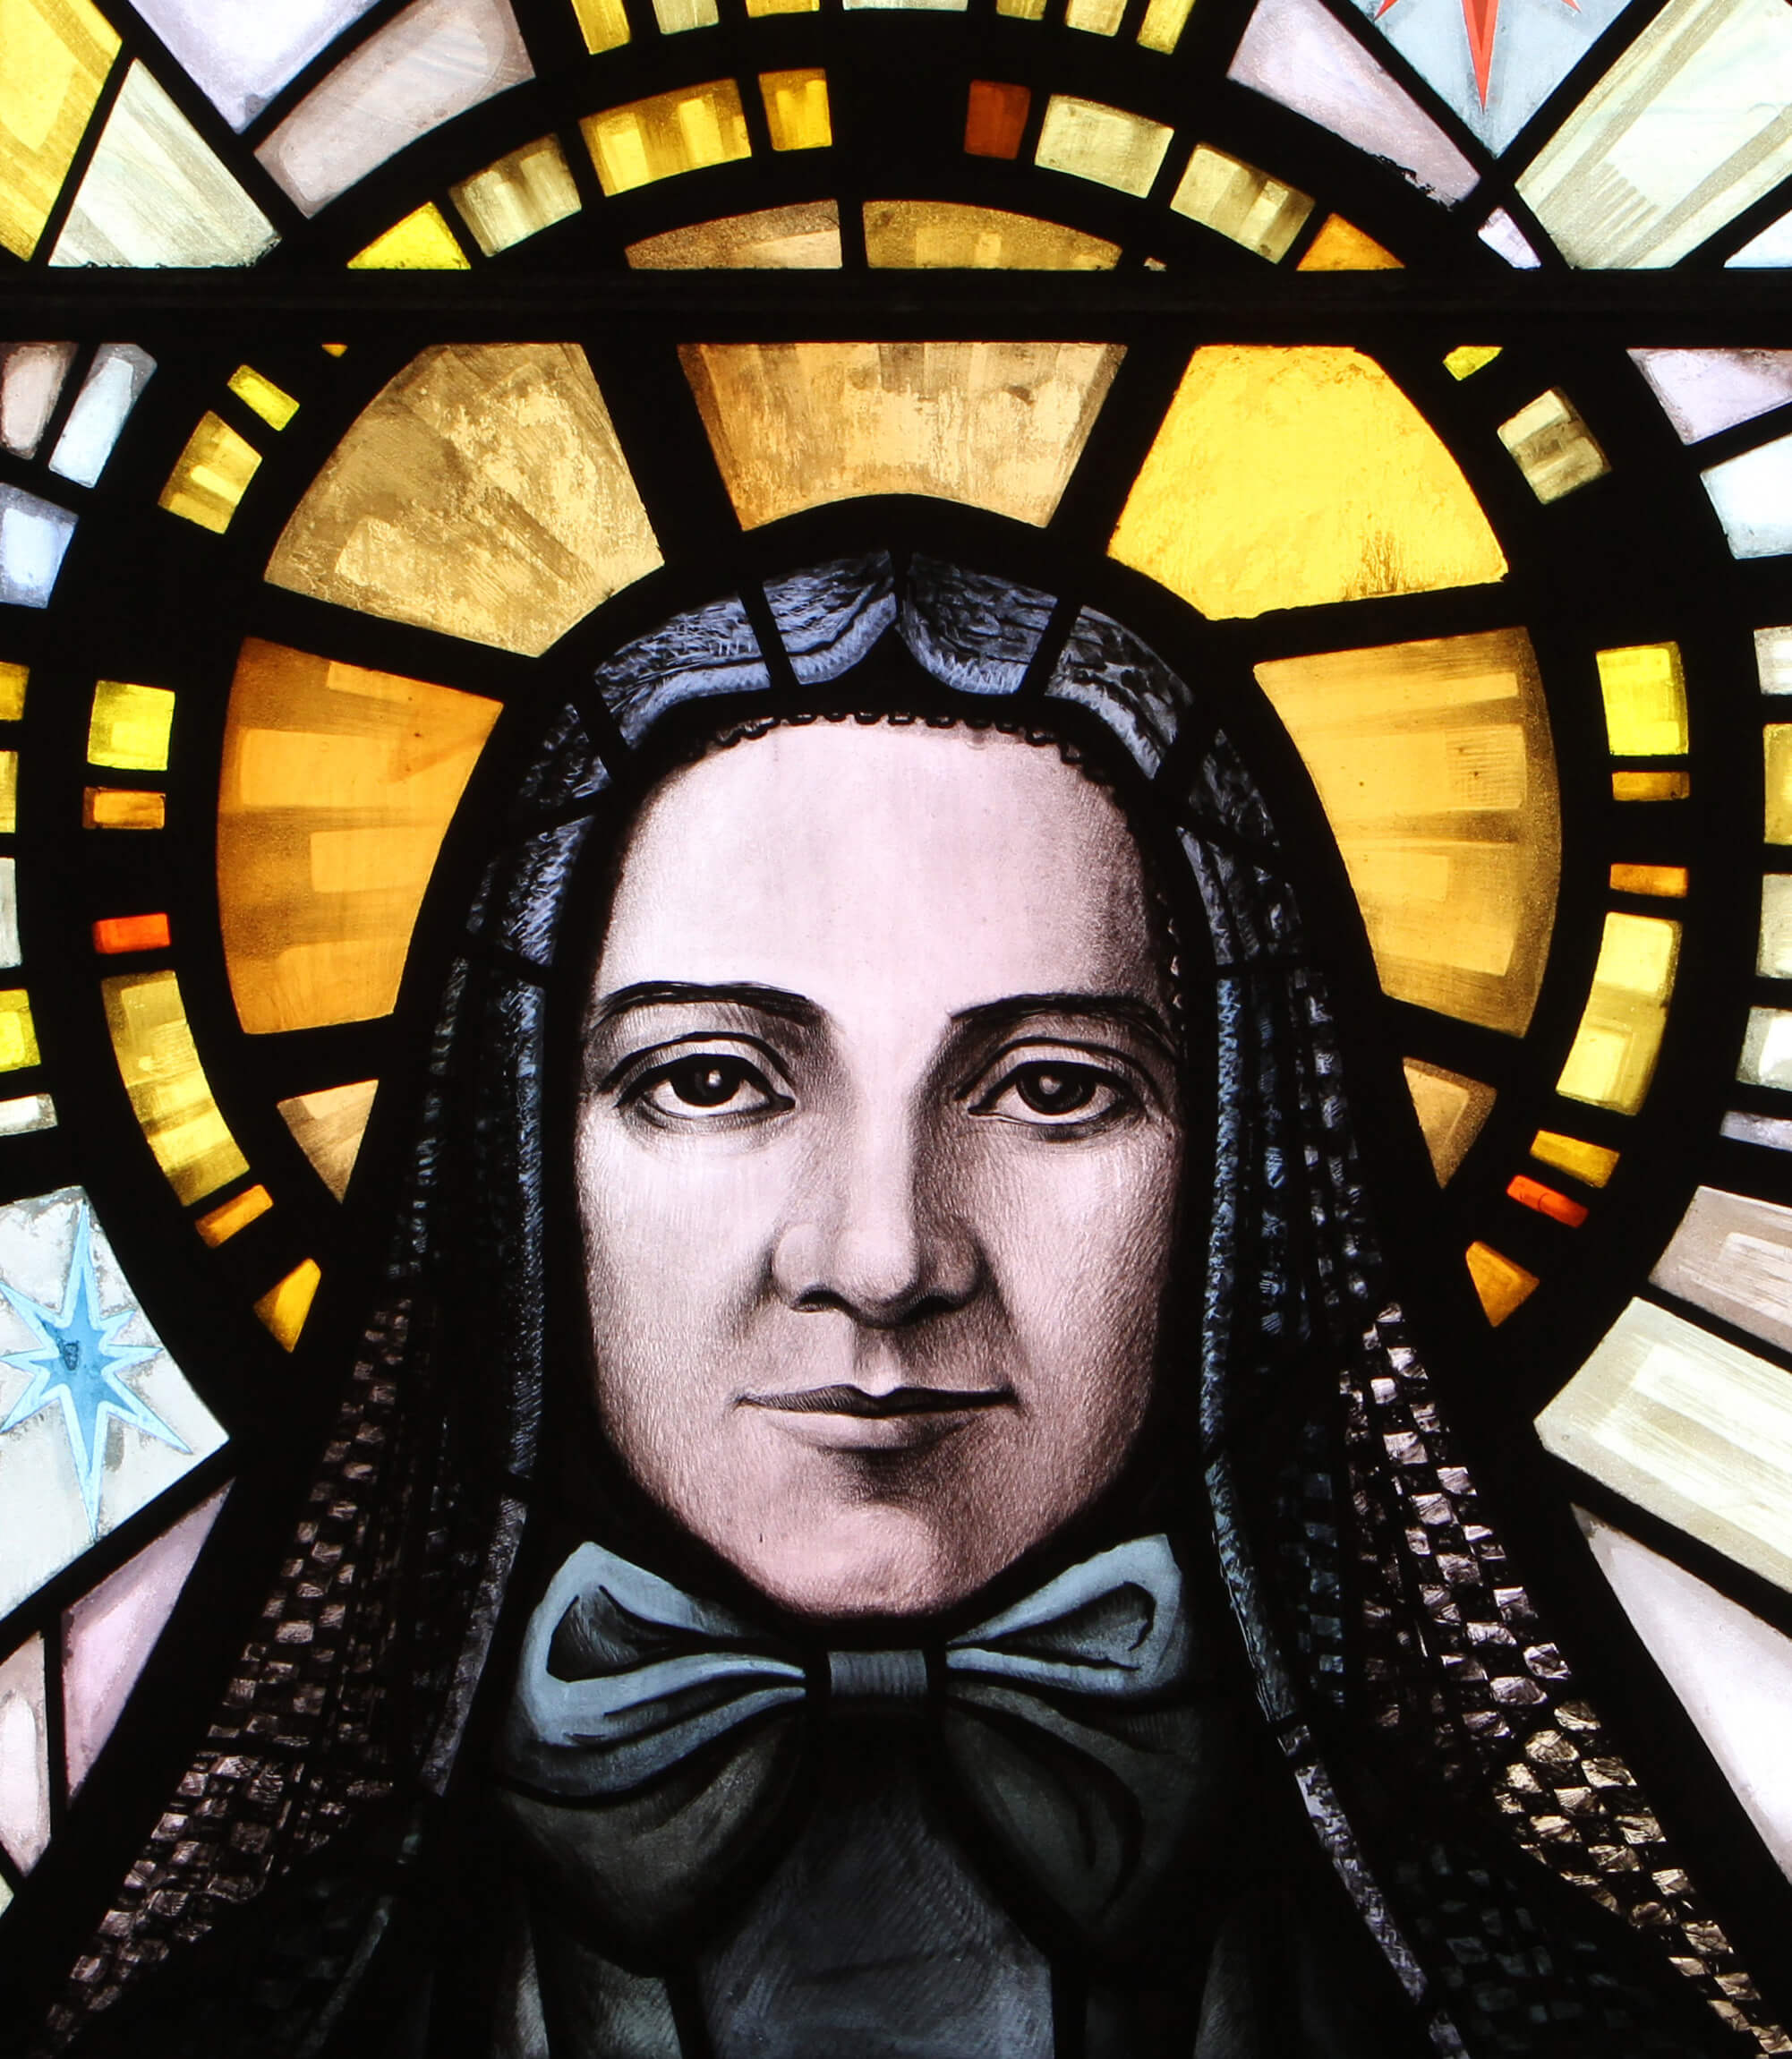 Colorado lawmakers vote to create day honoring St. Frances Xavier